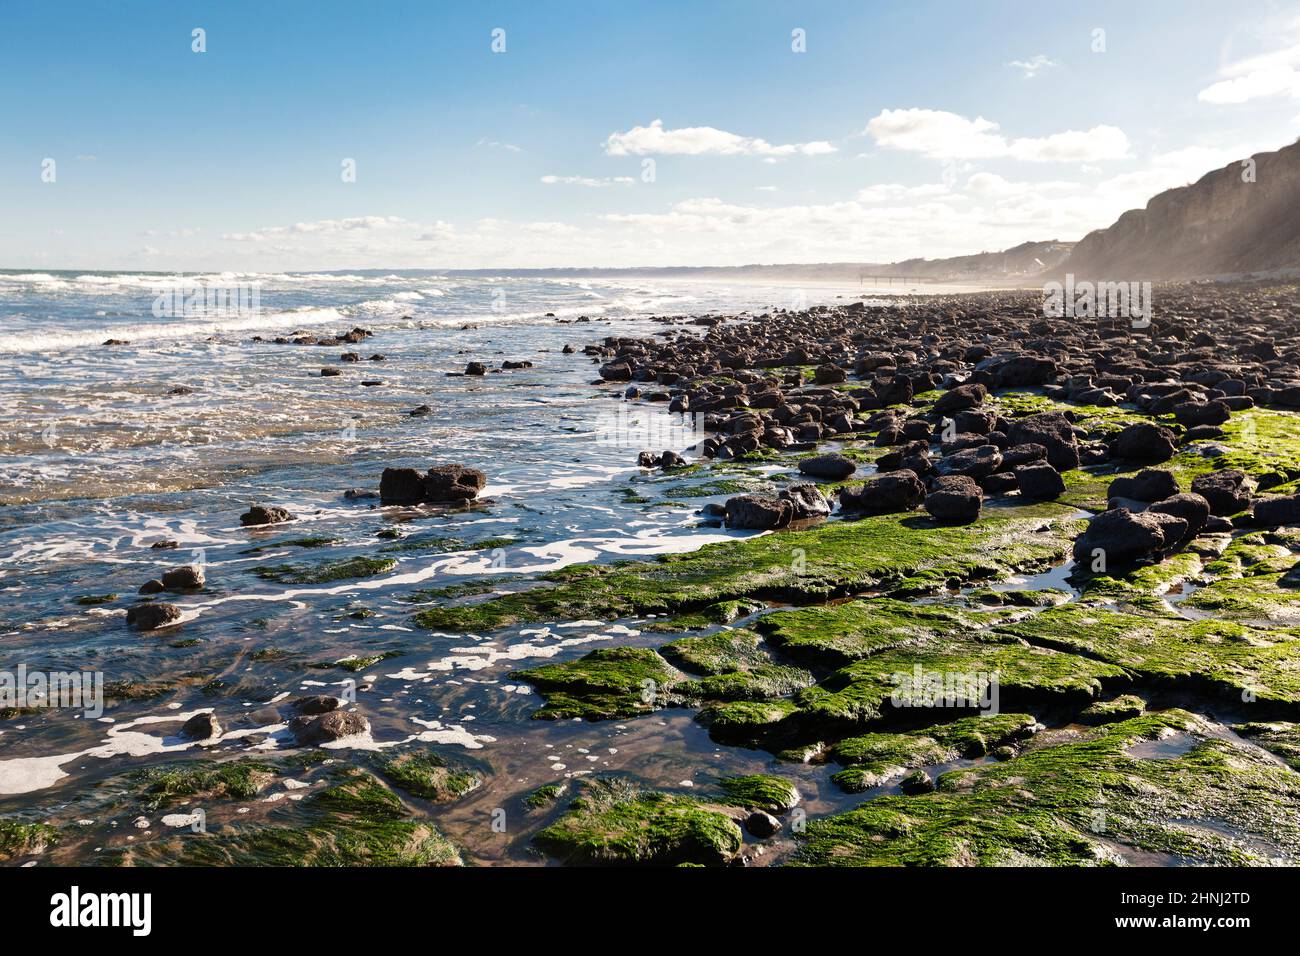 Deserted rocky beach in the morning light at Omaha Beach, Normandy, France Stock Photo